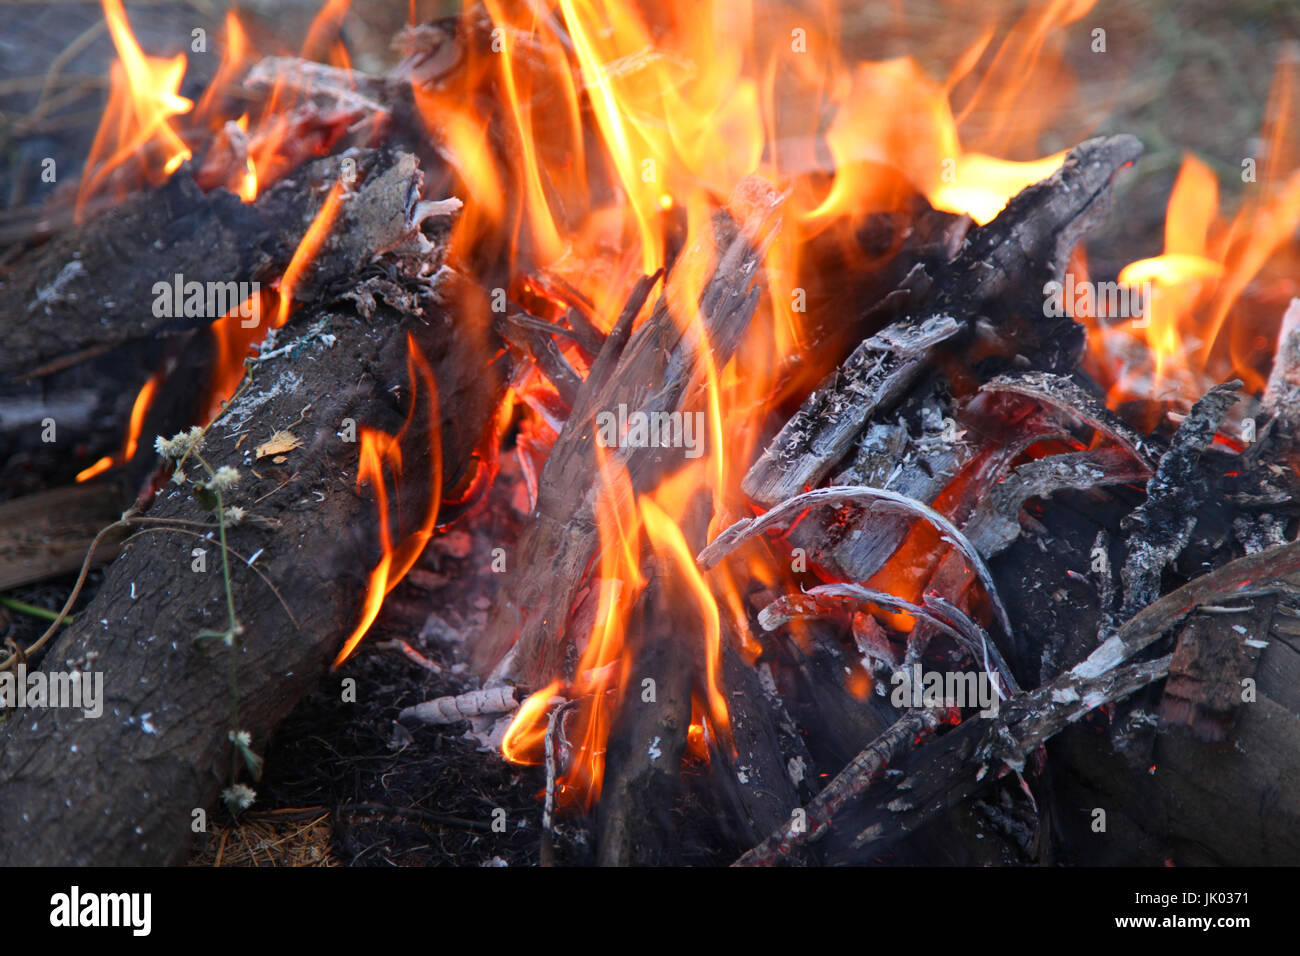 Burning firewood in the fireplace close up Stock Photo - Alamy